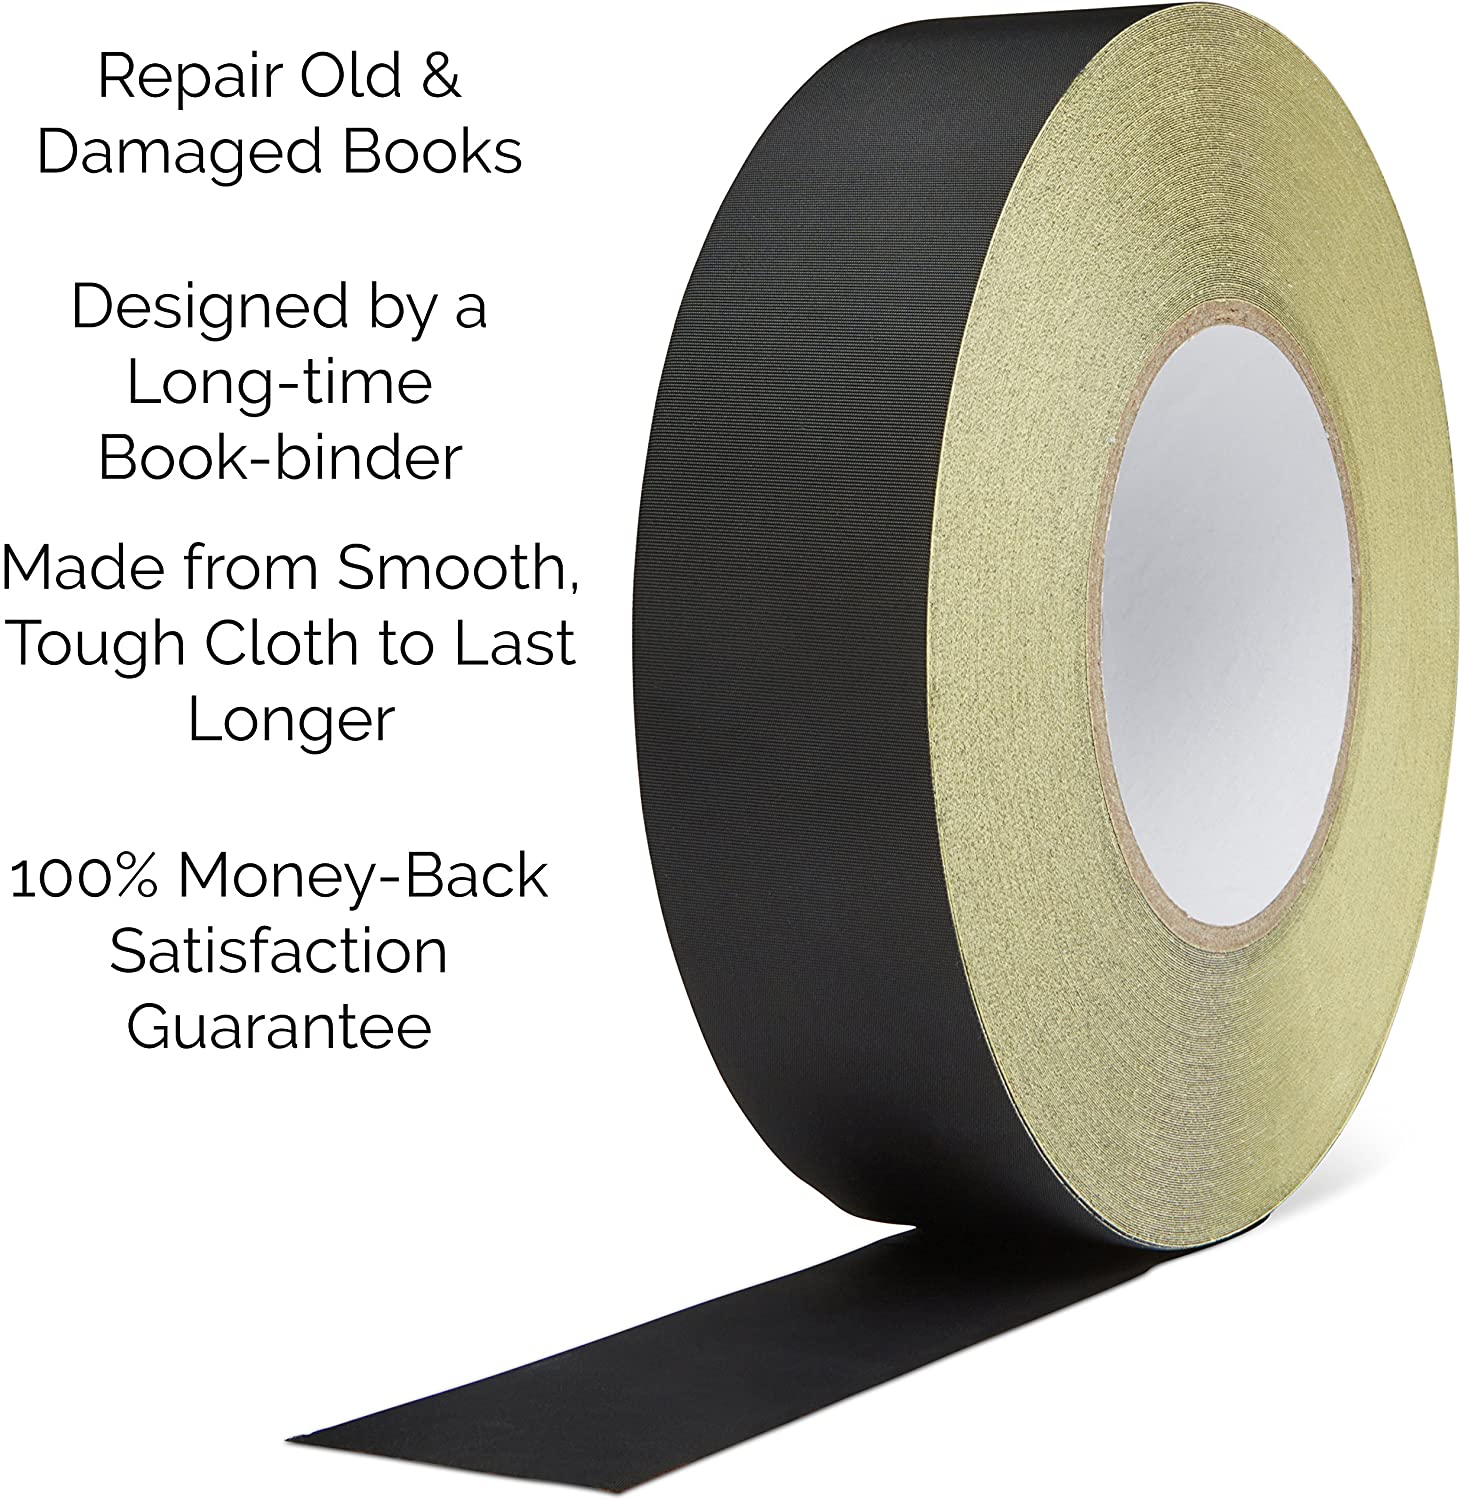 Koltose by Mash - Bookbinding Tape, Gray Cloth Book Repair Tape for Bookbinders, Grey Fabric Hinging Tape, Craft Tape, 2 Inches by 45 Feet